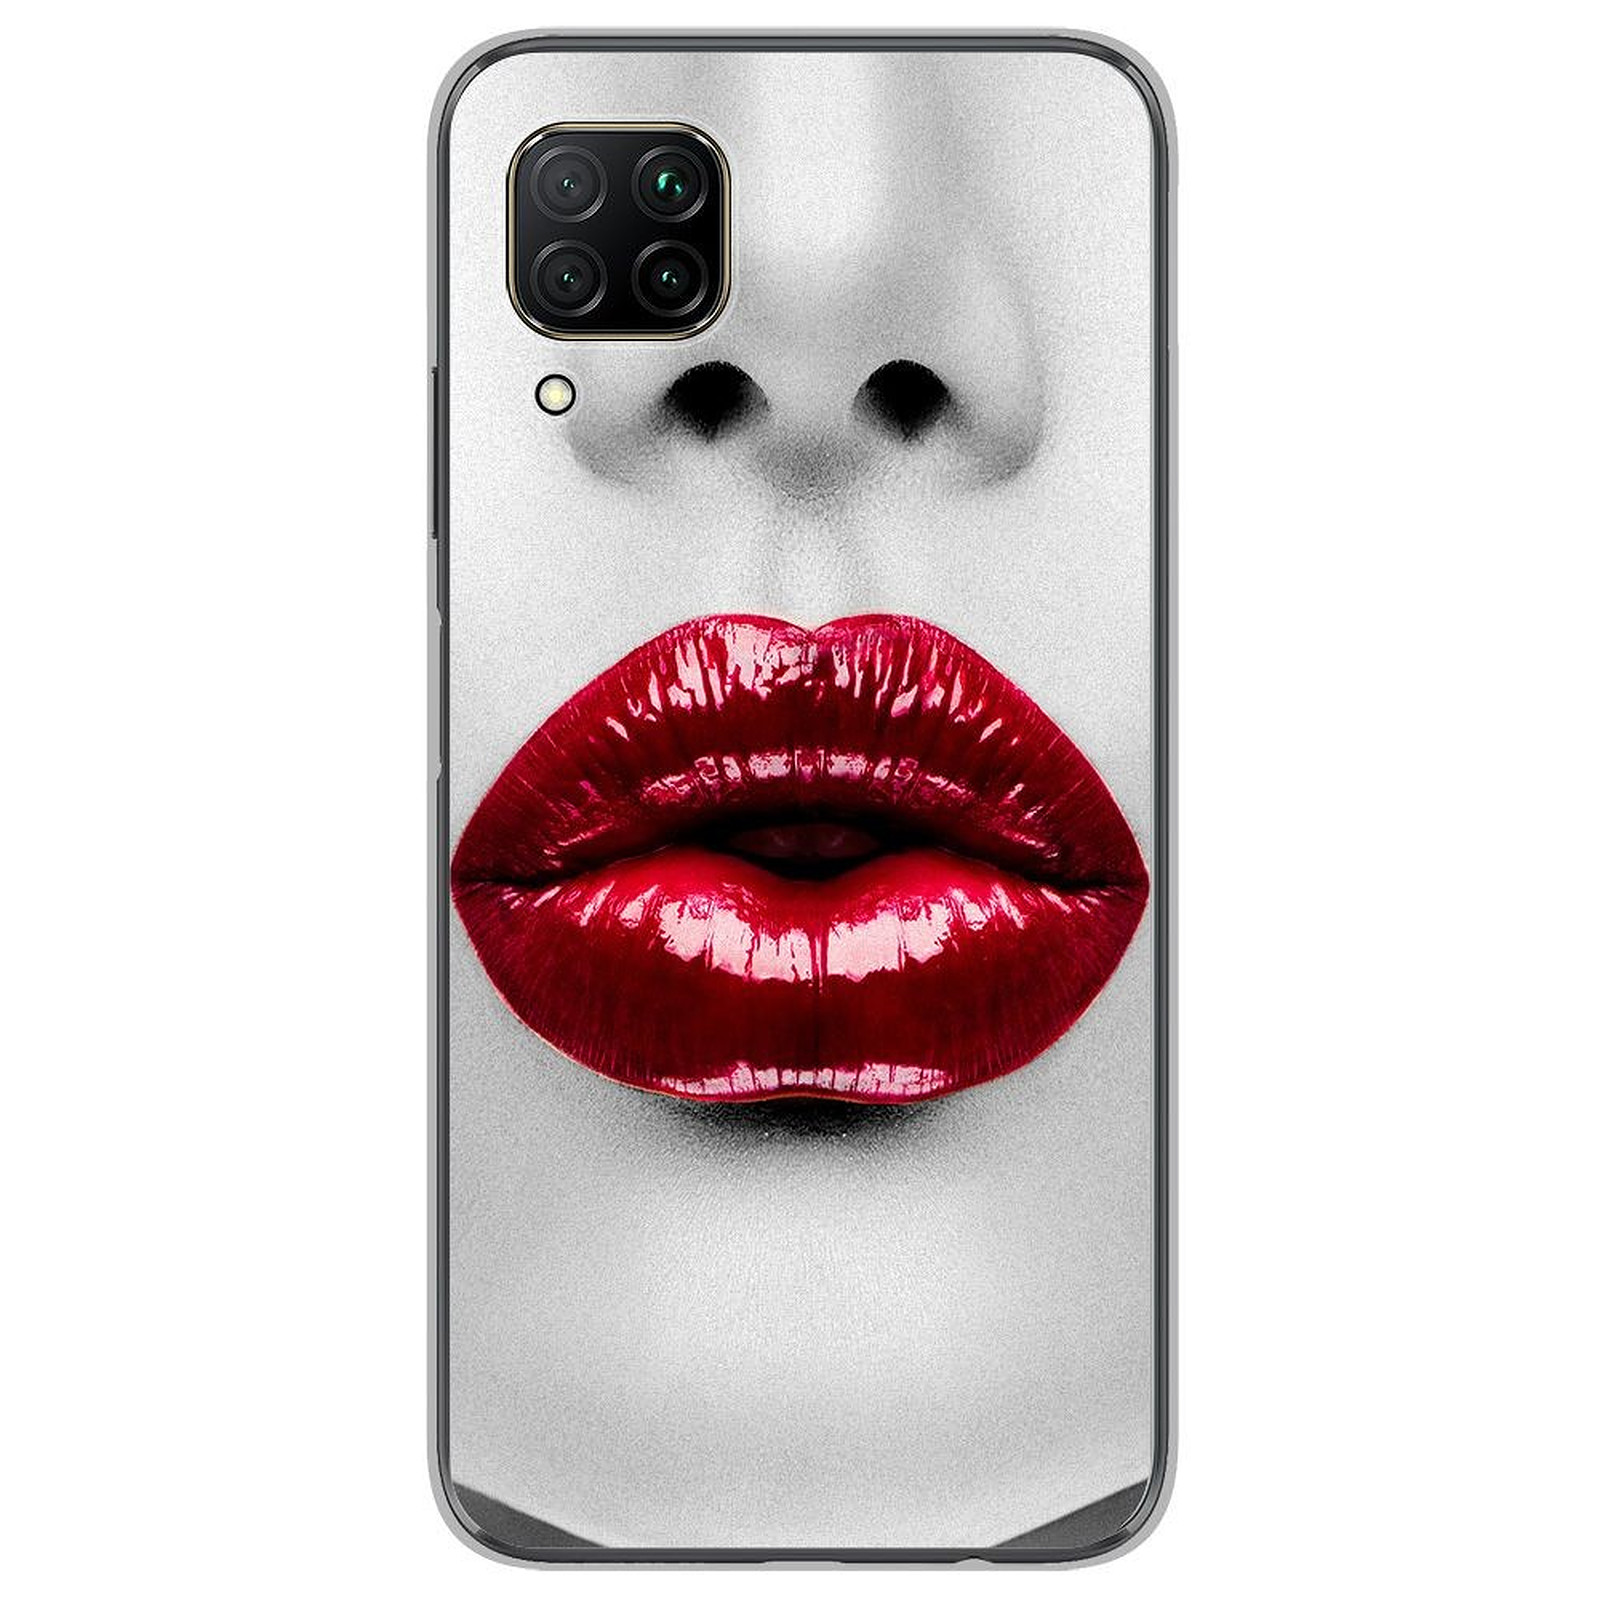 1001 Coques Coque silicone gel Huawei P40 Lite motif Lèvres Rouges - Coque telephone 1001Coques